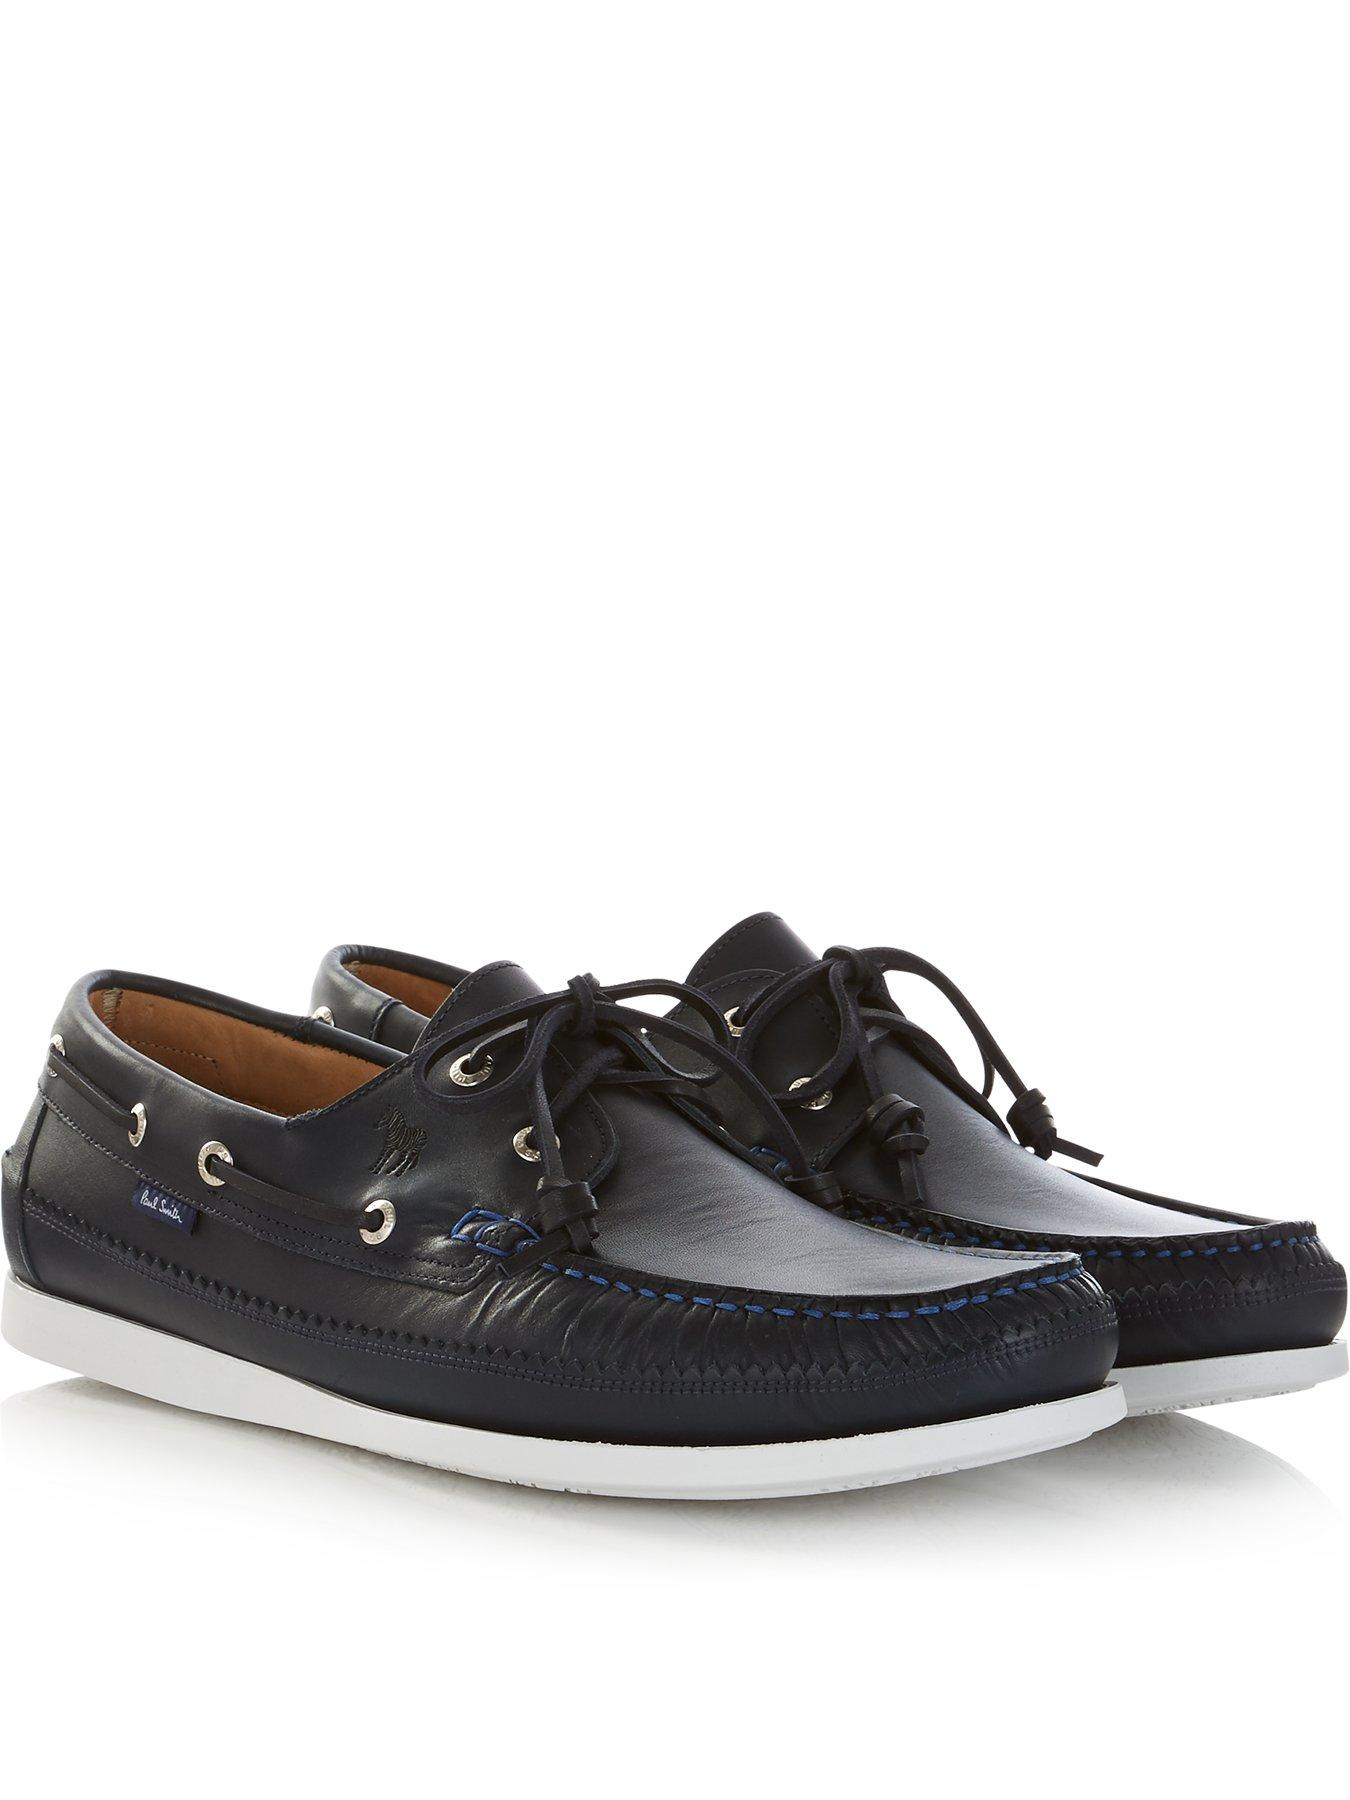 PS PAUL SMITH Men's Archer Leather Boat 